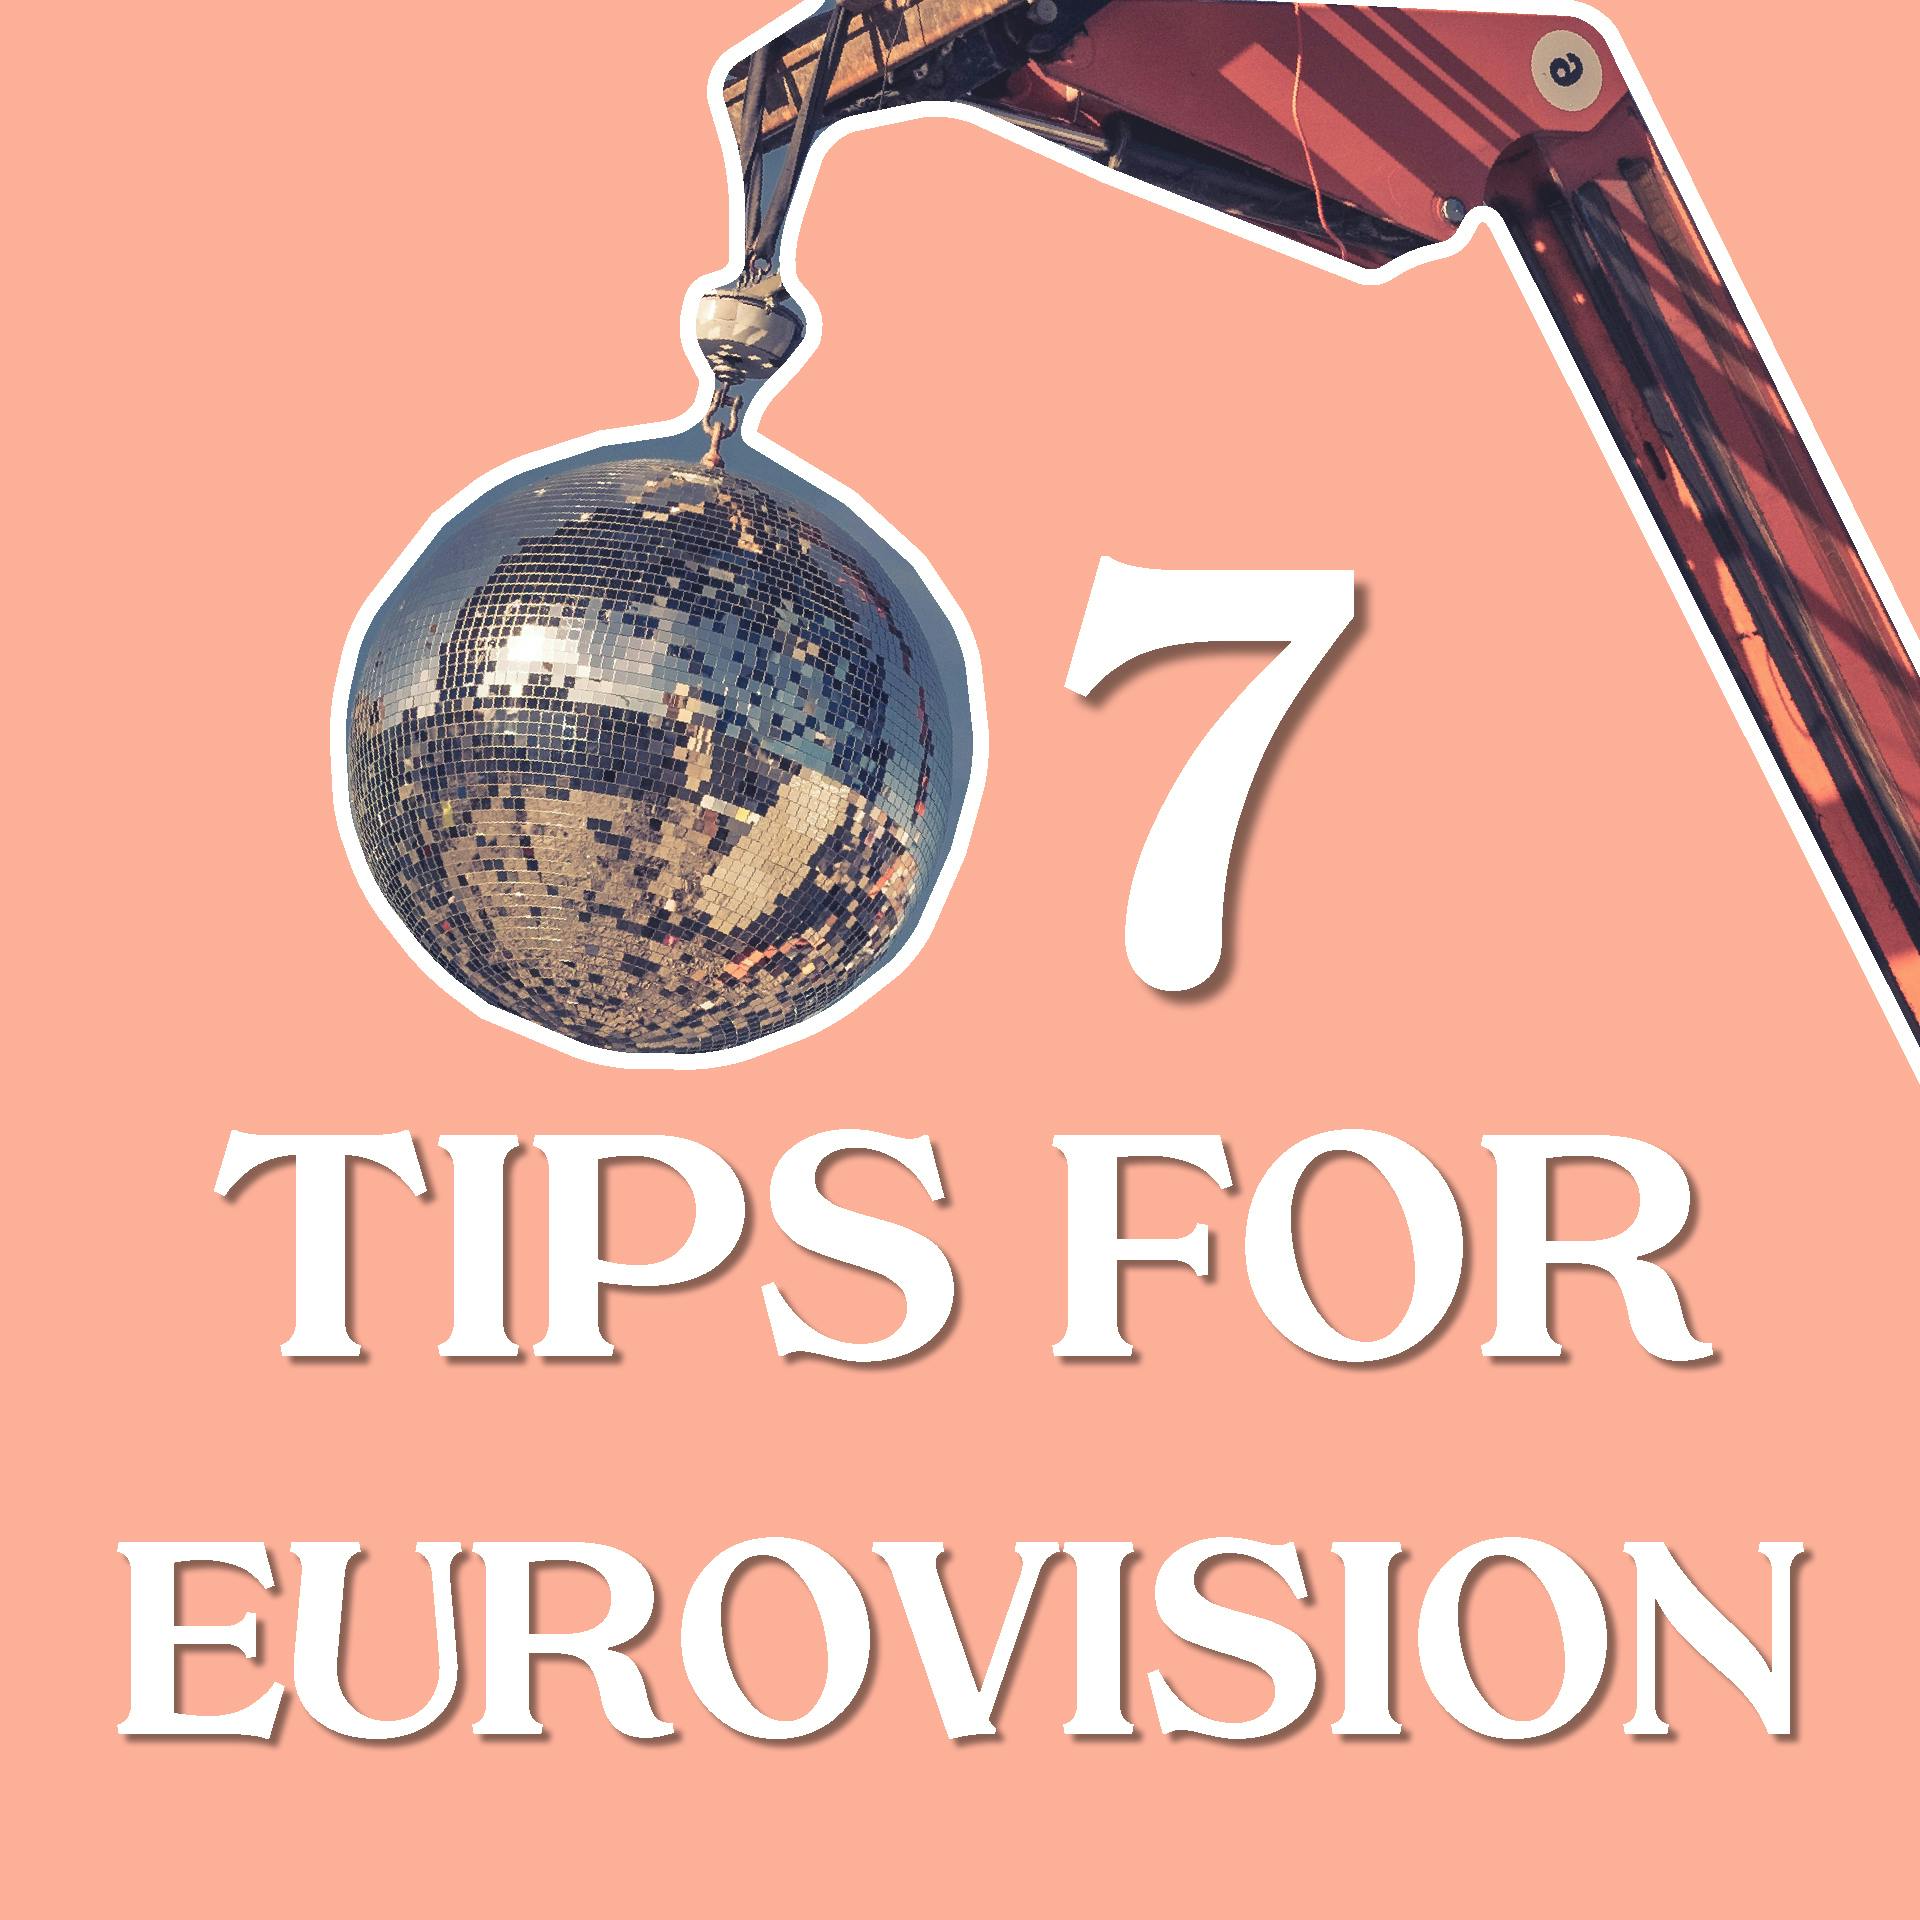 7 tips for eurovision